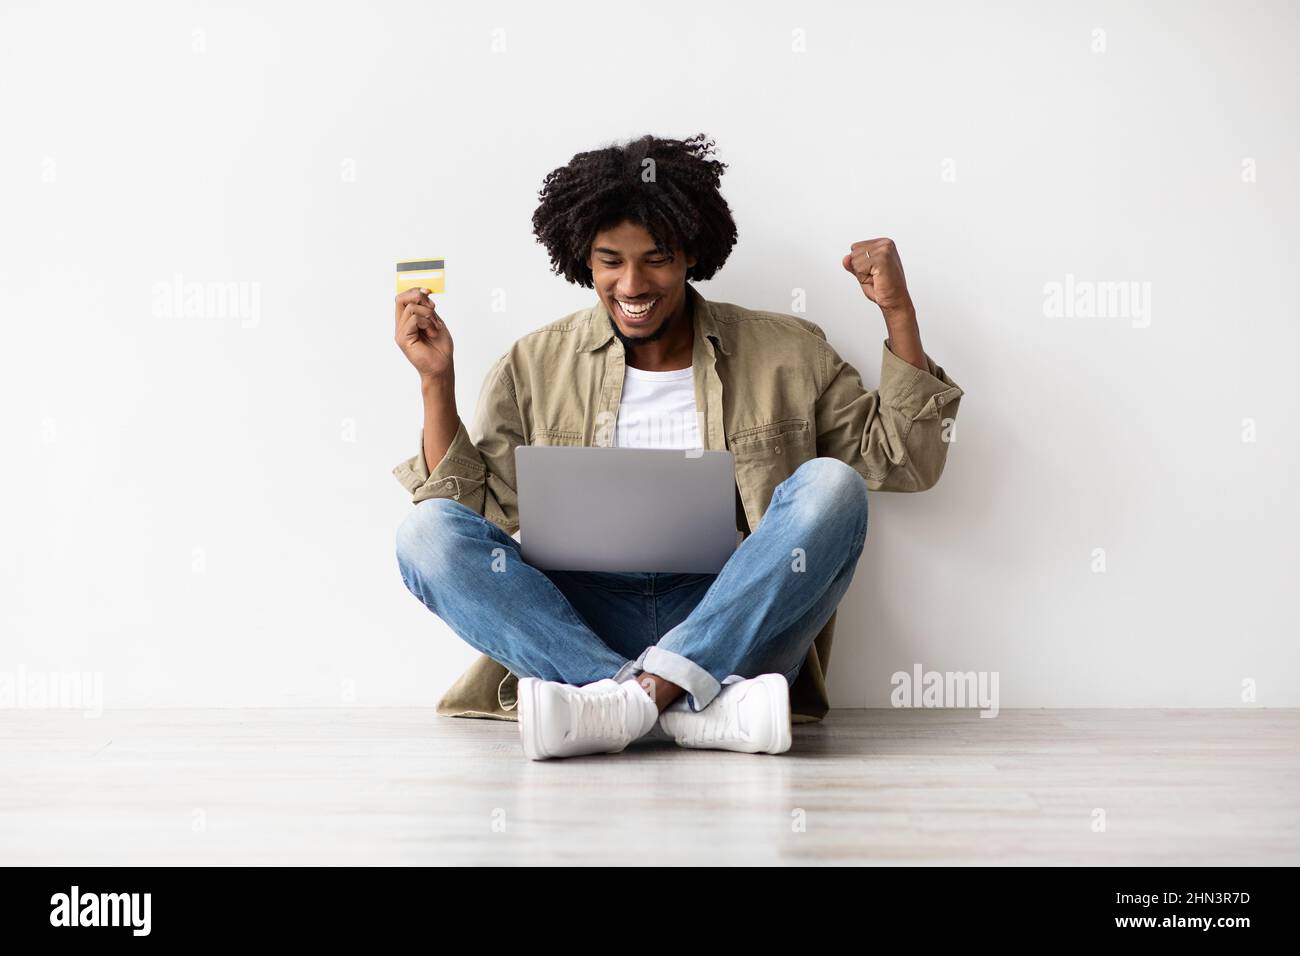 E-Commerce Concept. Portrait Of Excited Black Guy With Laptop And Credit Card Stock Photo